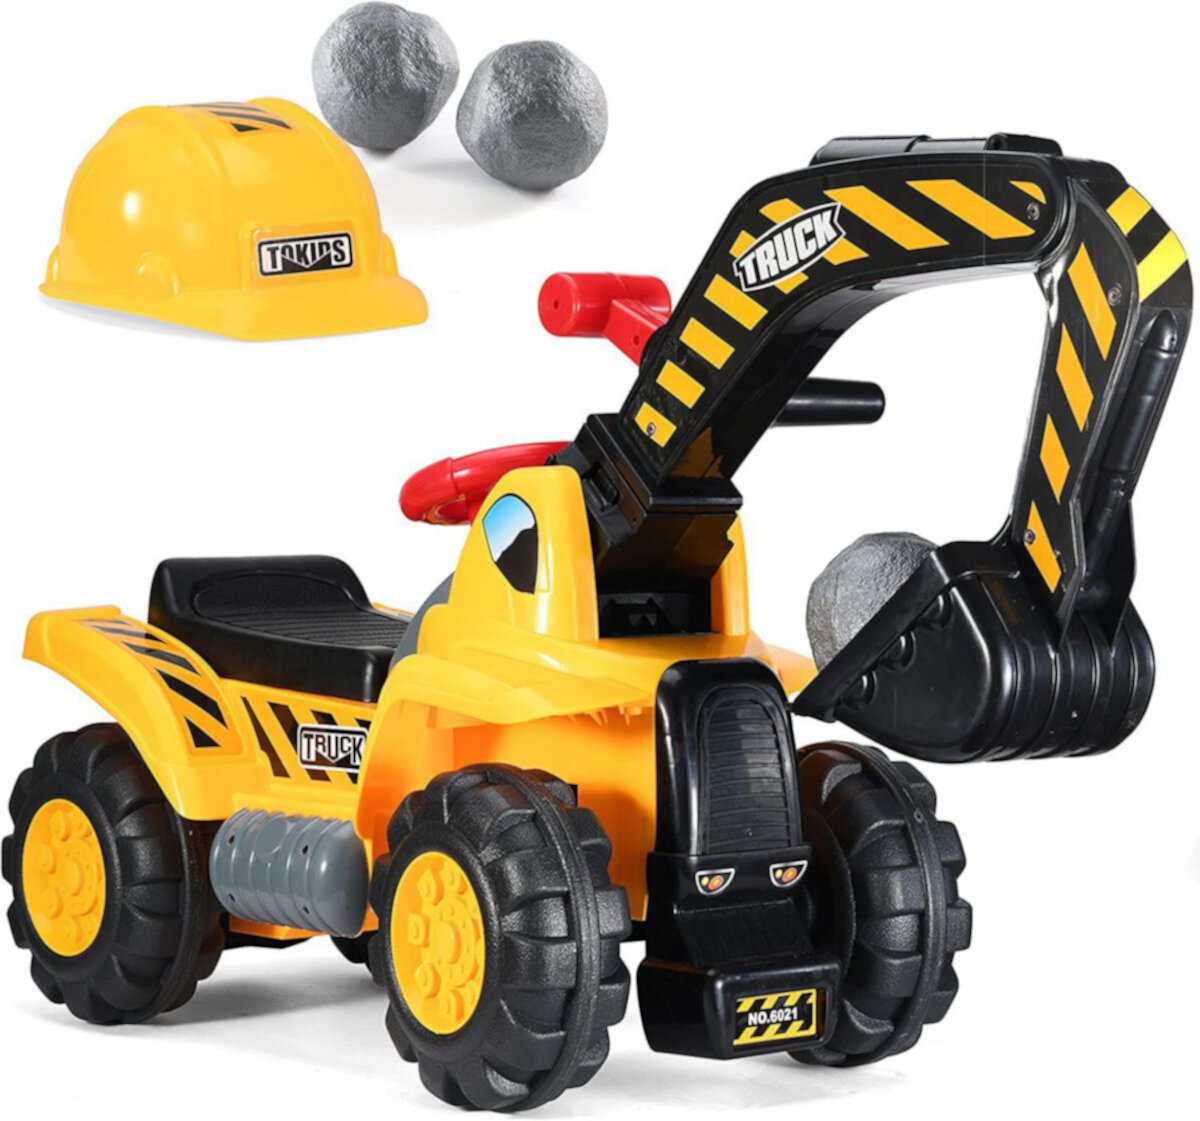 Toy Tractors for Kids Ride On Excavator Sounds Digger Scooter Bulldozer Includes Helmet with Rocks Play22